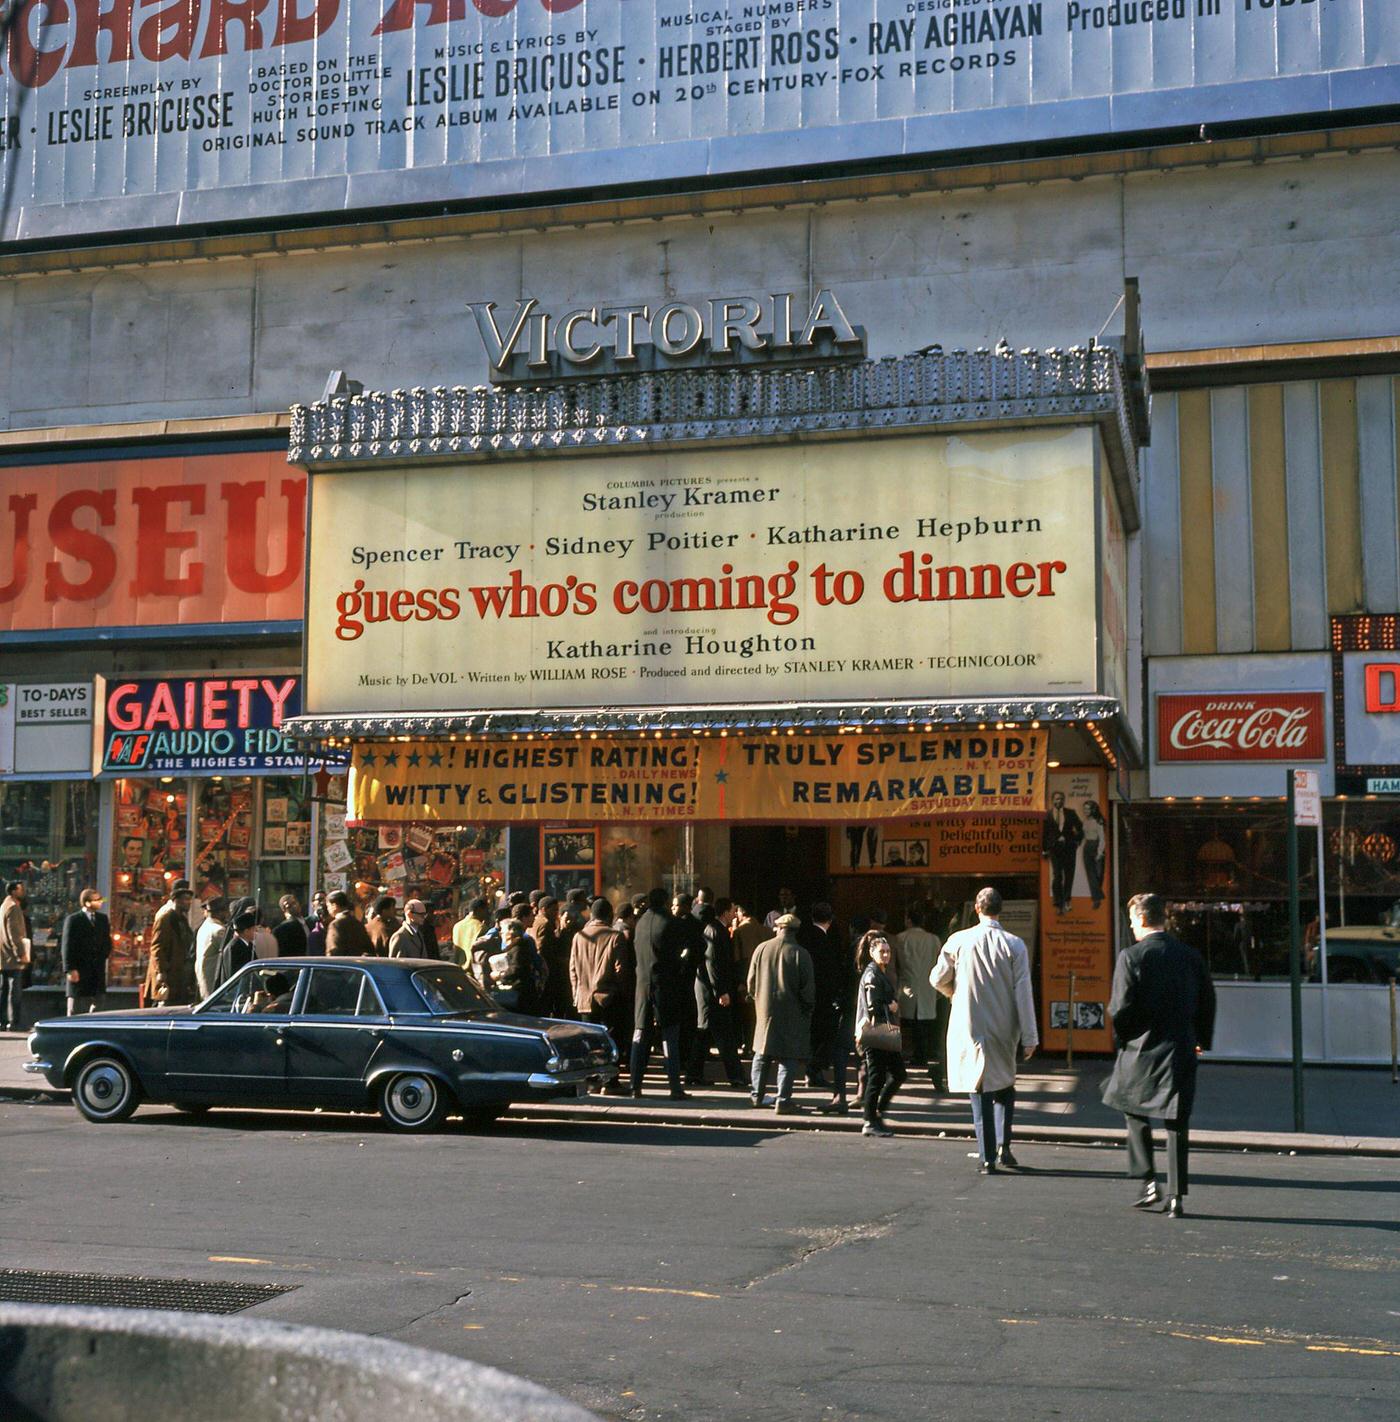 Cinema-Goers Line Up Outside The Victoria Theatre In Times Square, Manhattan, 1967